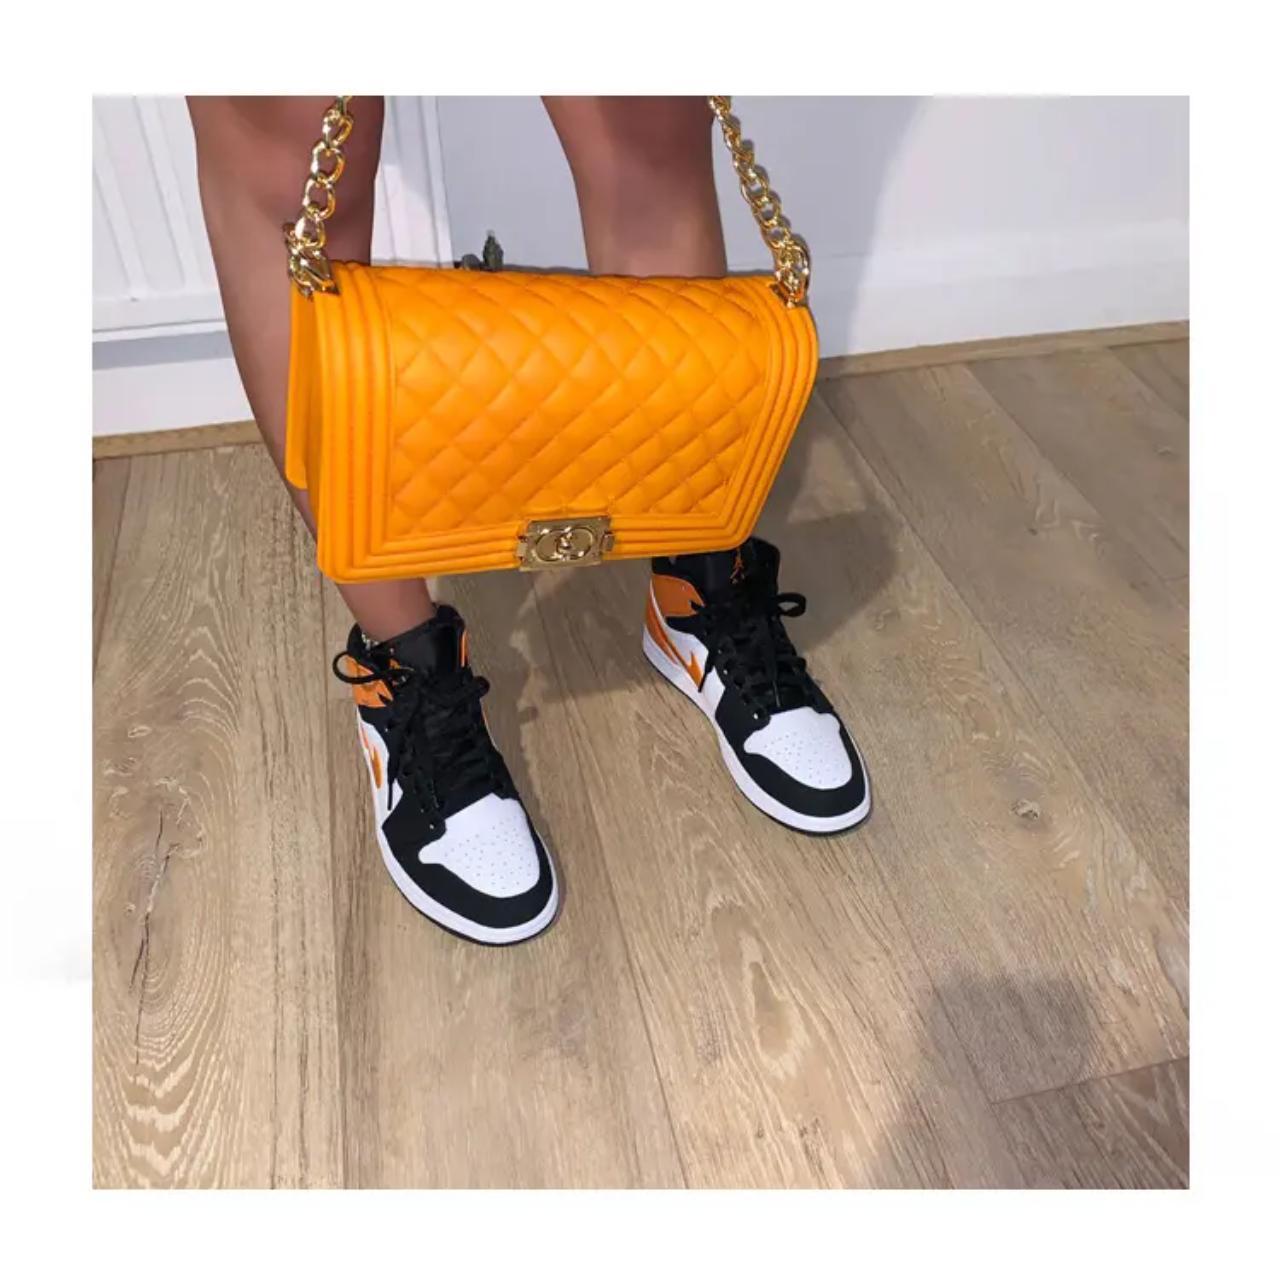 Retro jelly bags brand new comes in 3 different - Depop